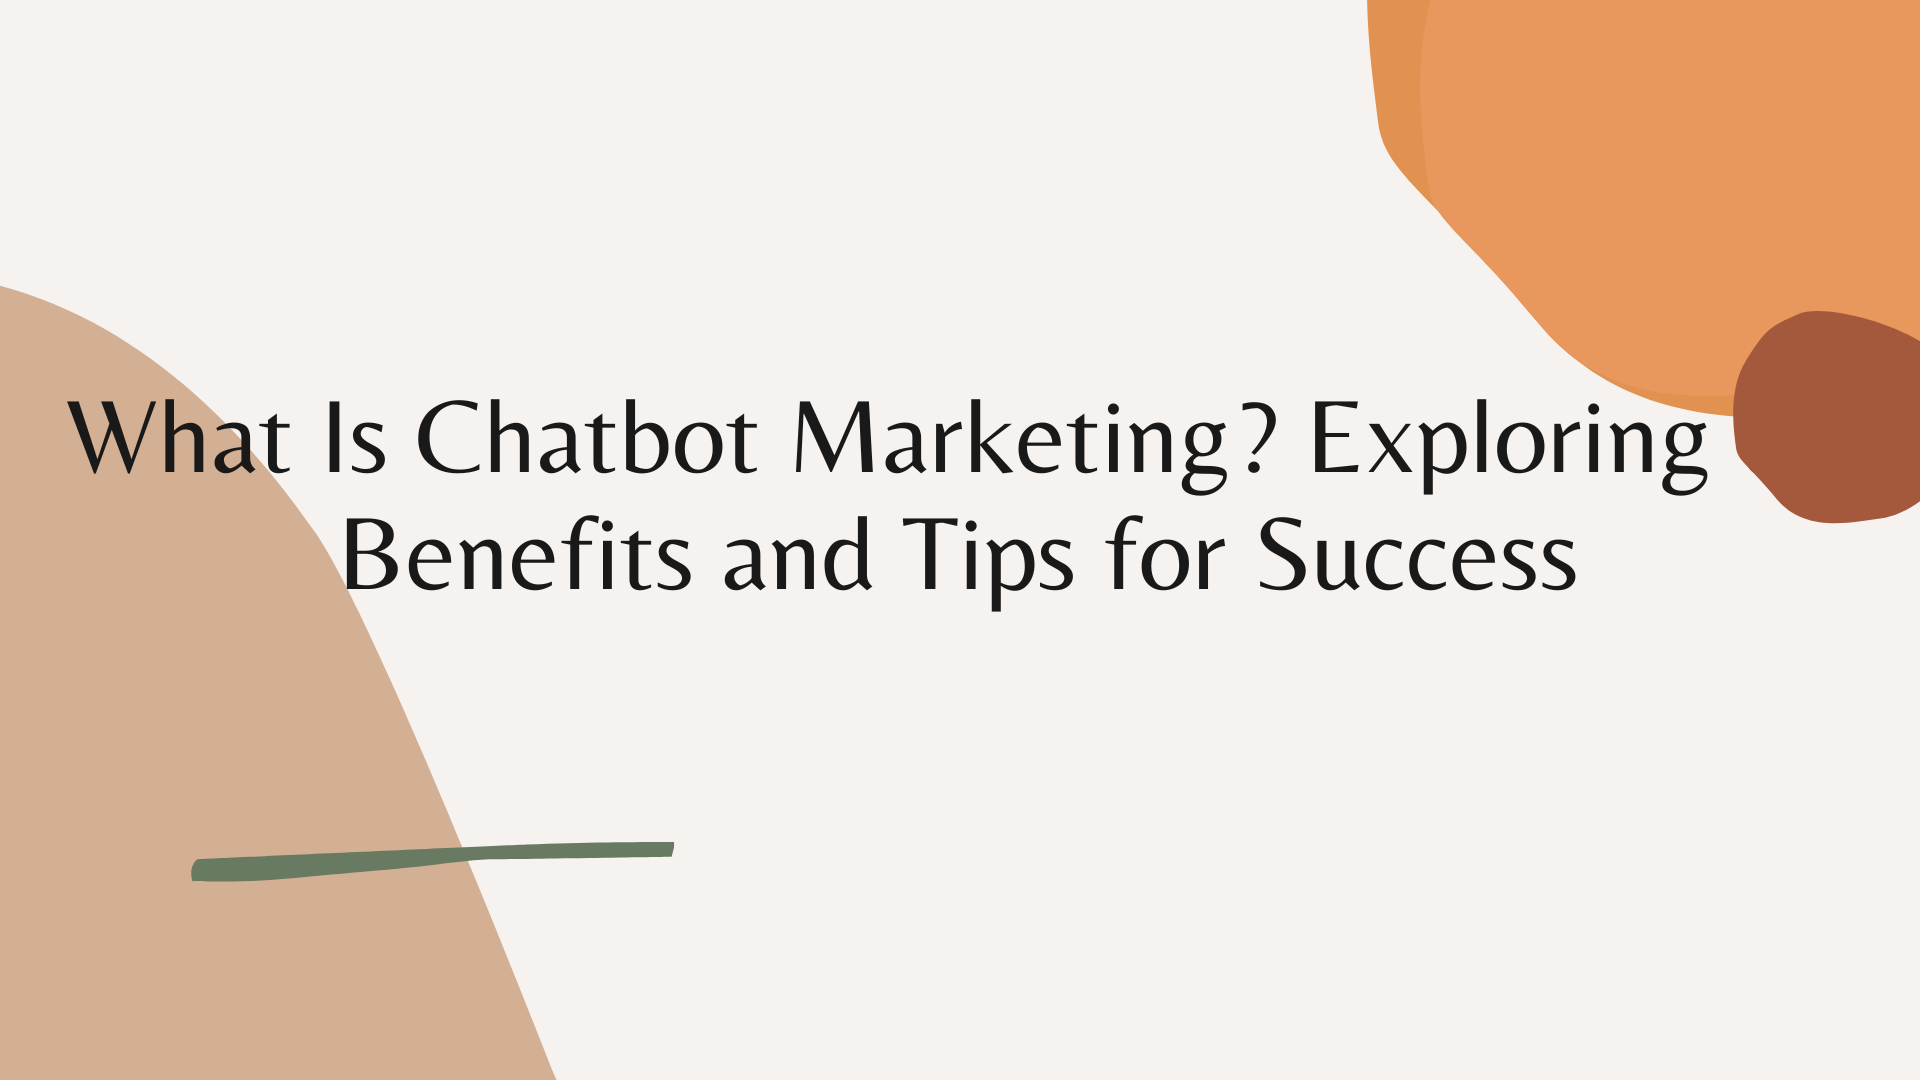 What-Is-Chatbot-Marketing-Exploring-the-Benefits-and-Tips-for-Success.